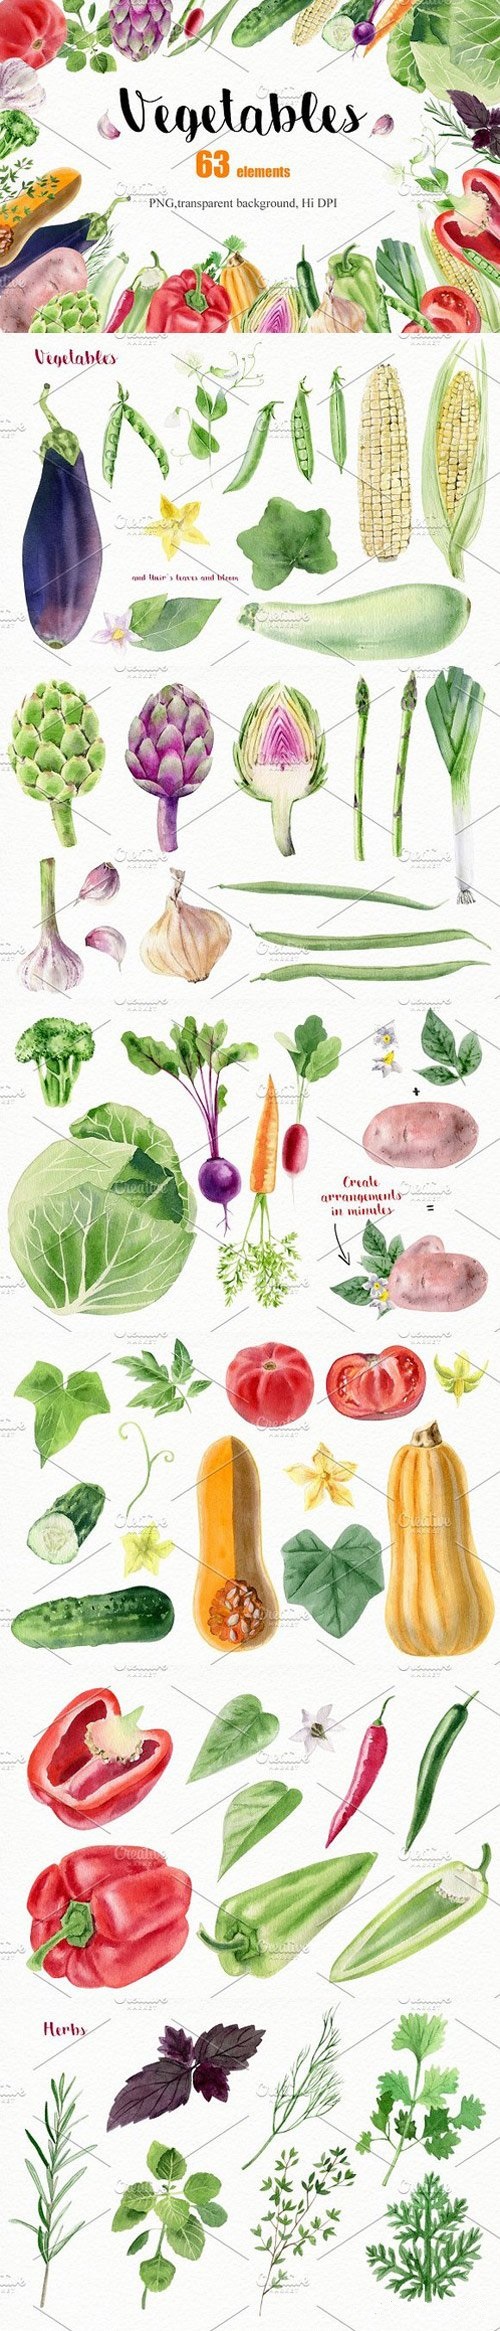 Watercolor vegetables and herbs 1634324